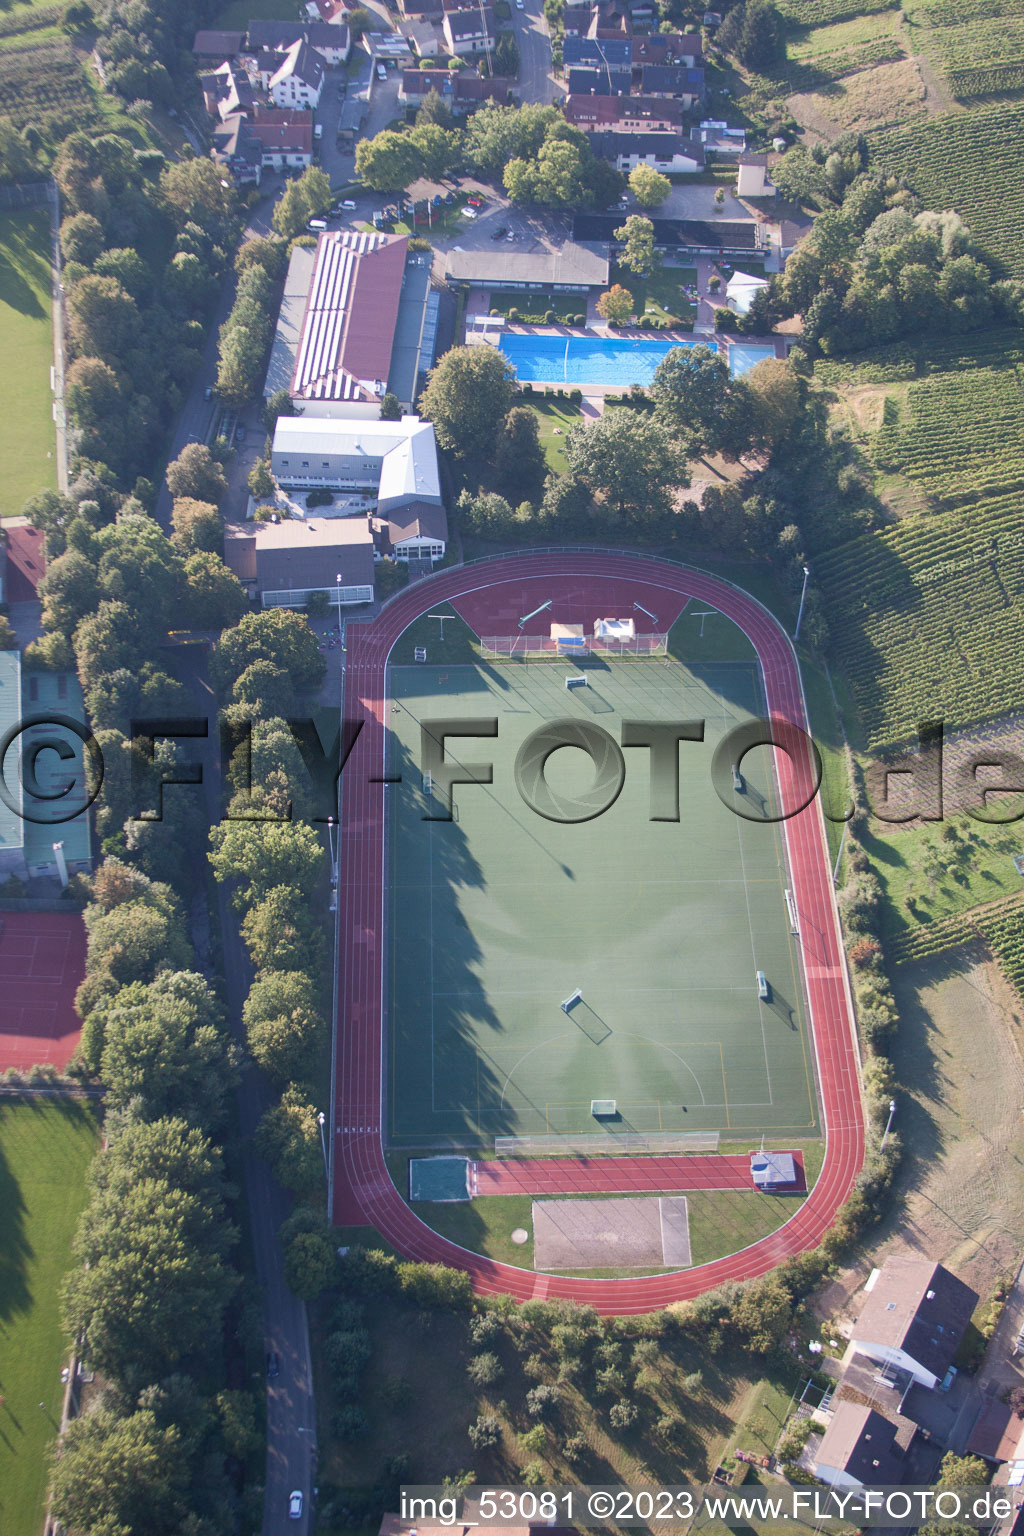 South Baden sports school in Steinbach in the state Baden-Wuerttemberg, Germany out of the air